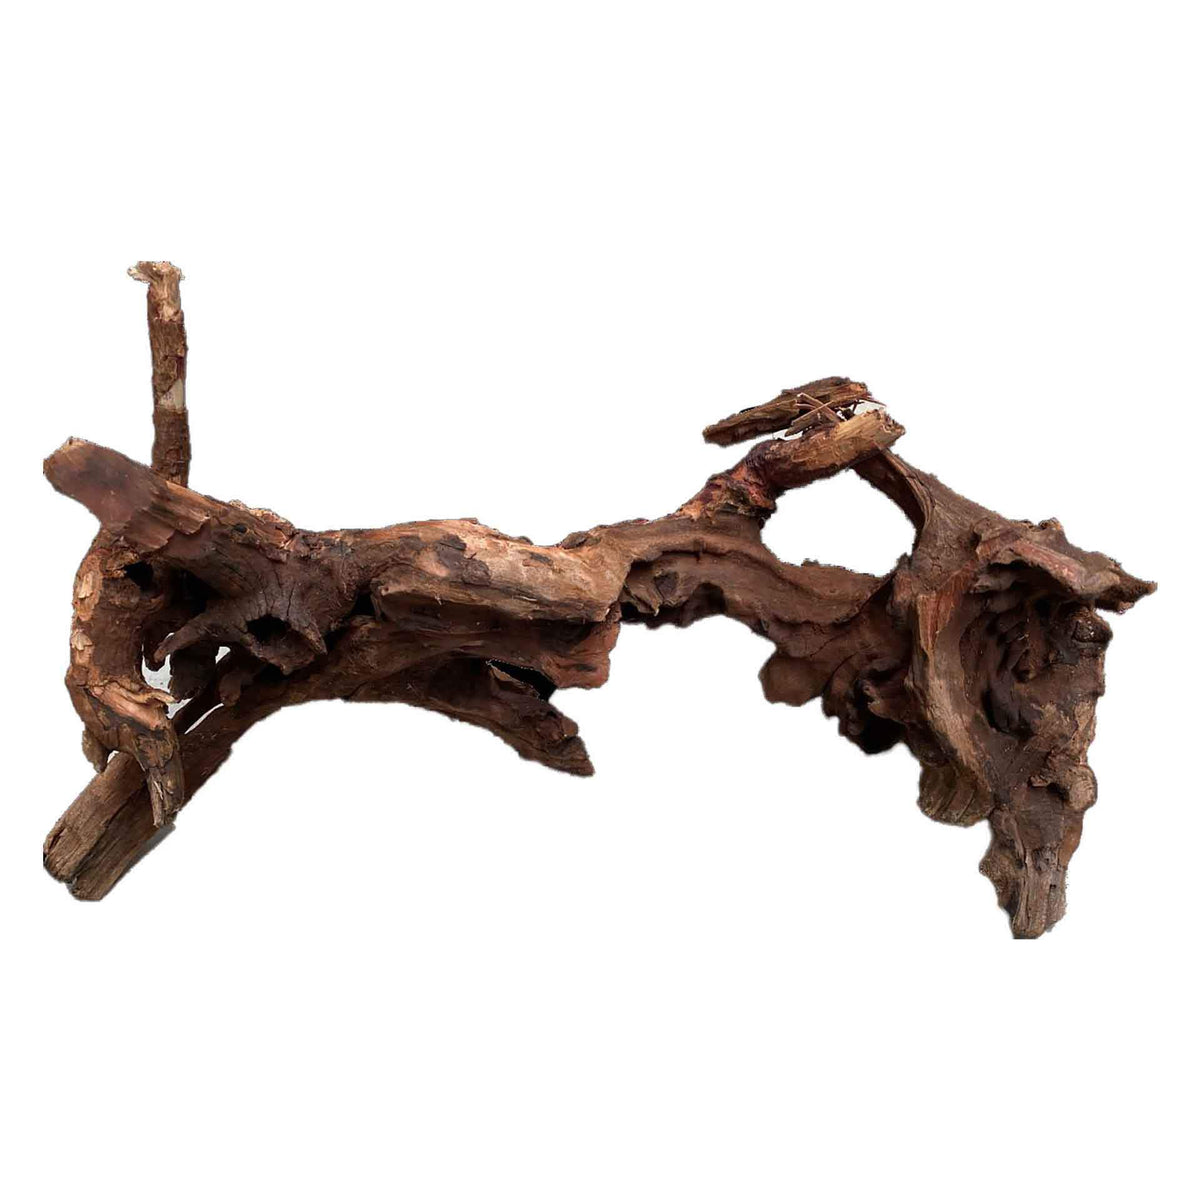 Dymax Driftwood Large - In Store Pick Up Only